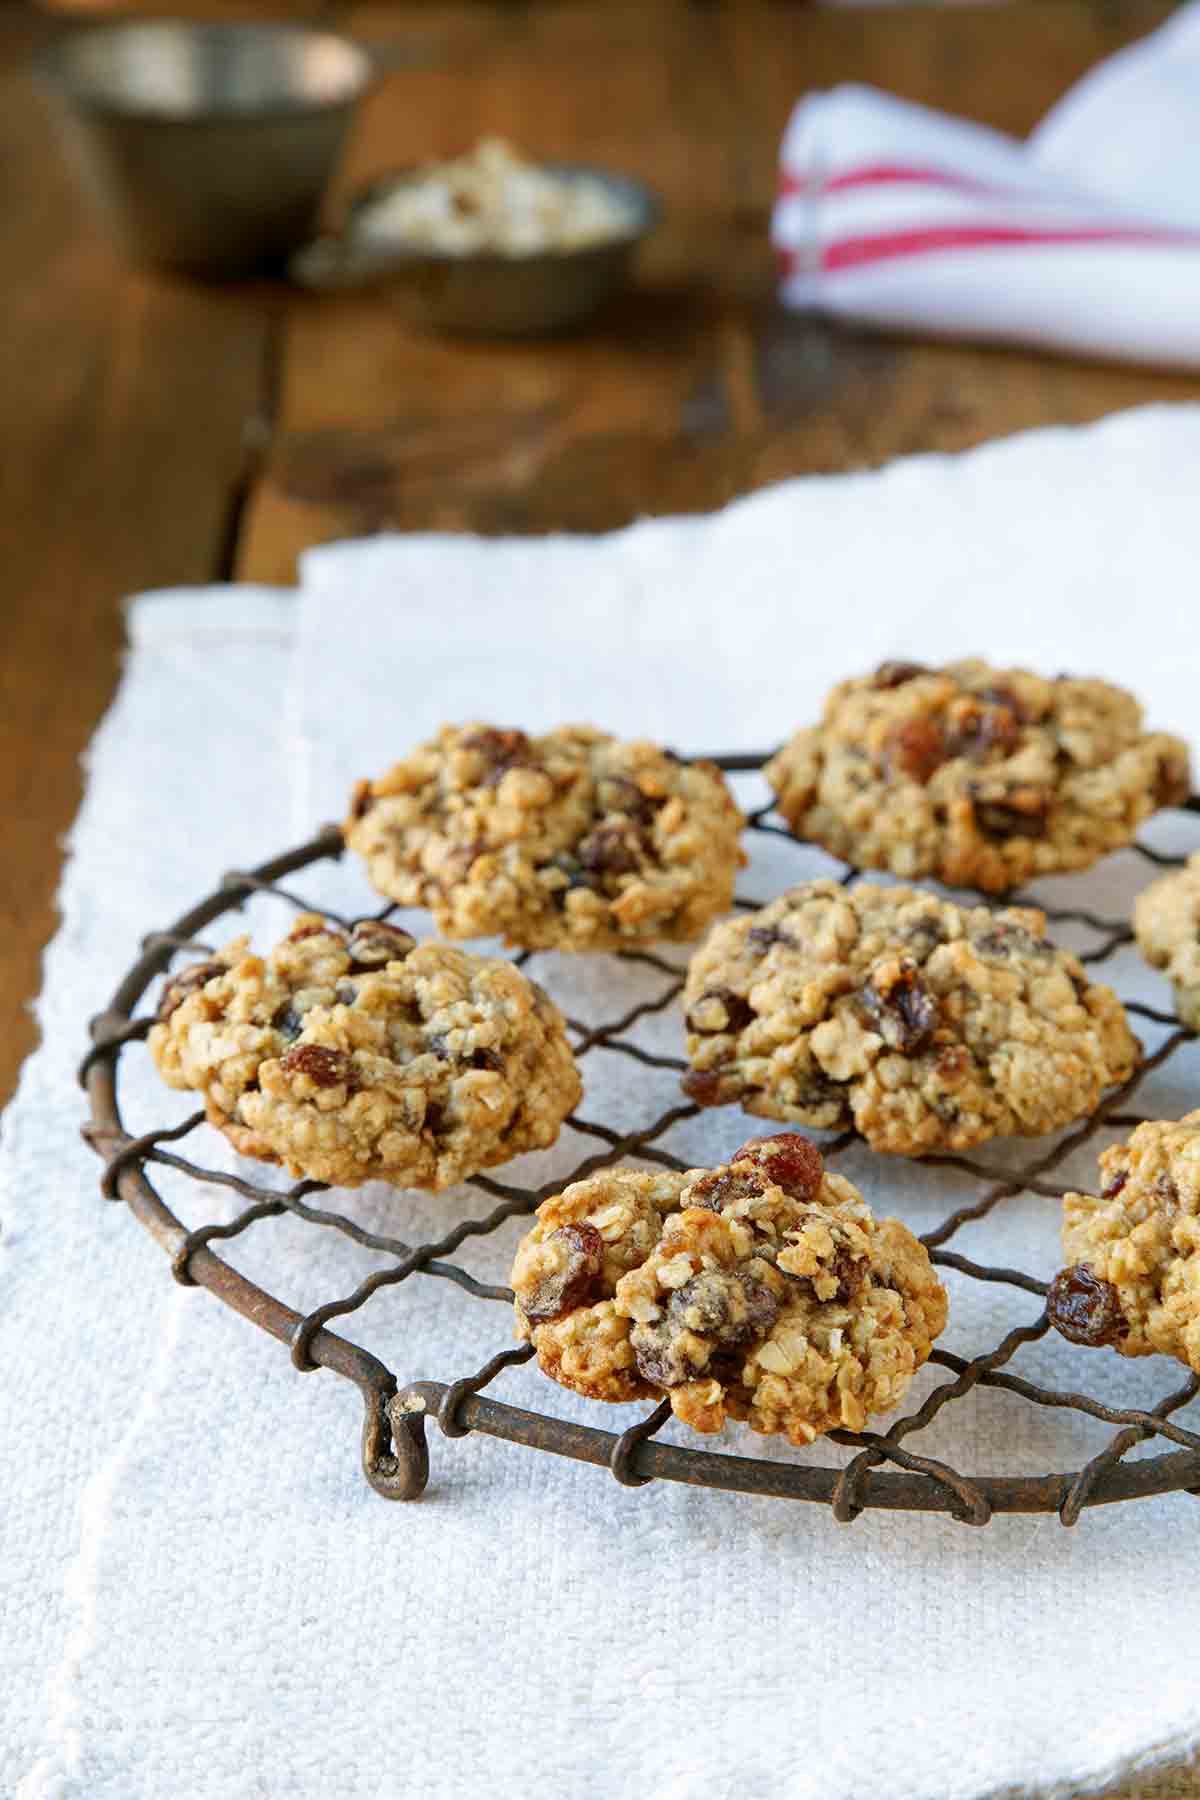 Seven oatmeal raisin cookies on a wire rack set on a white woven placemat.